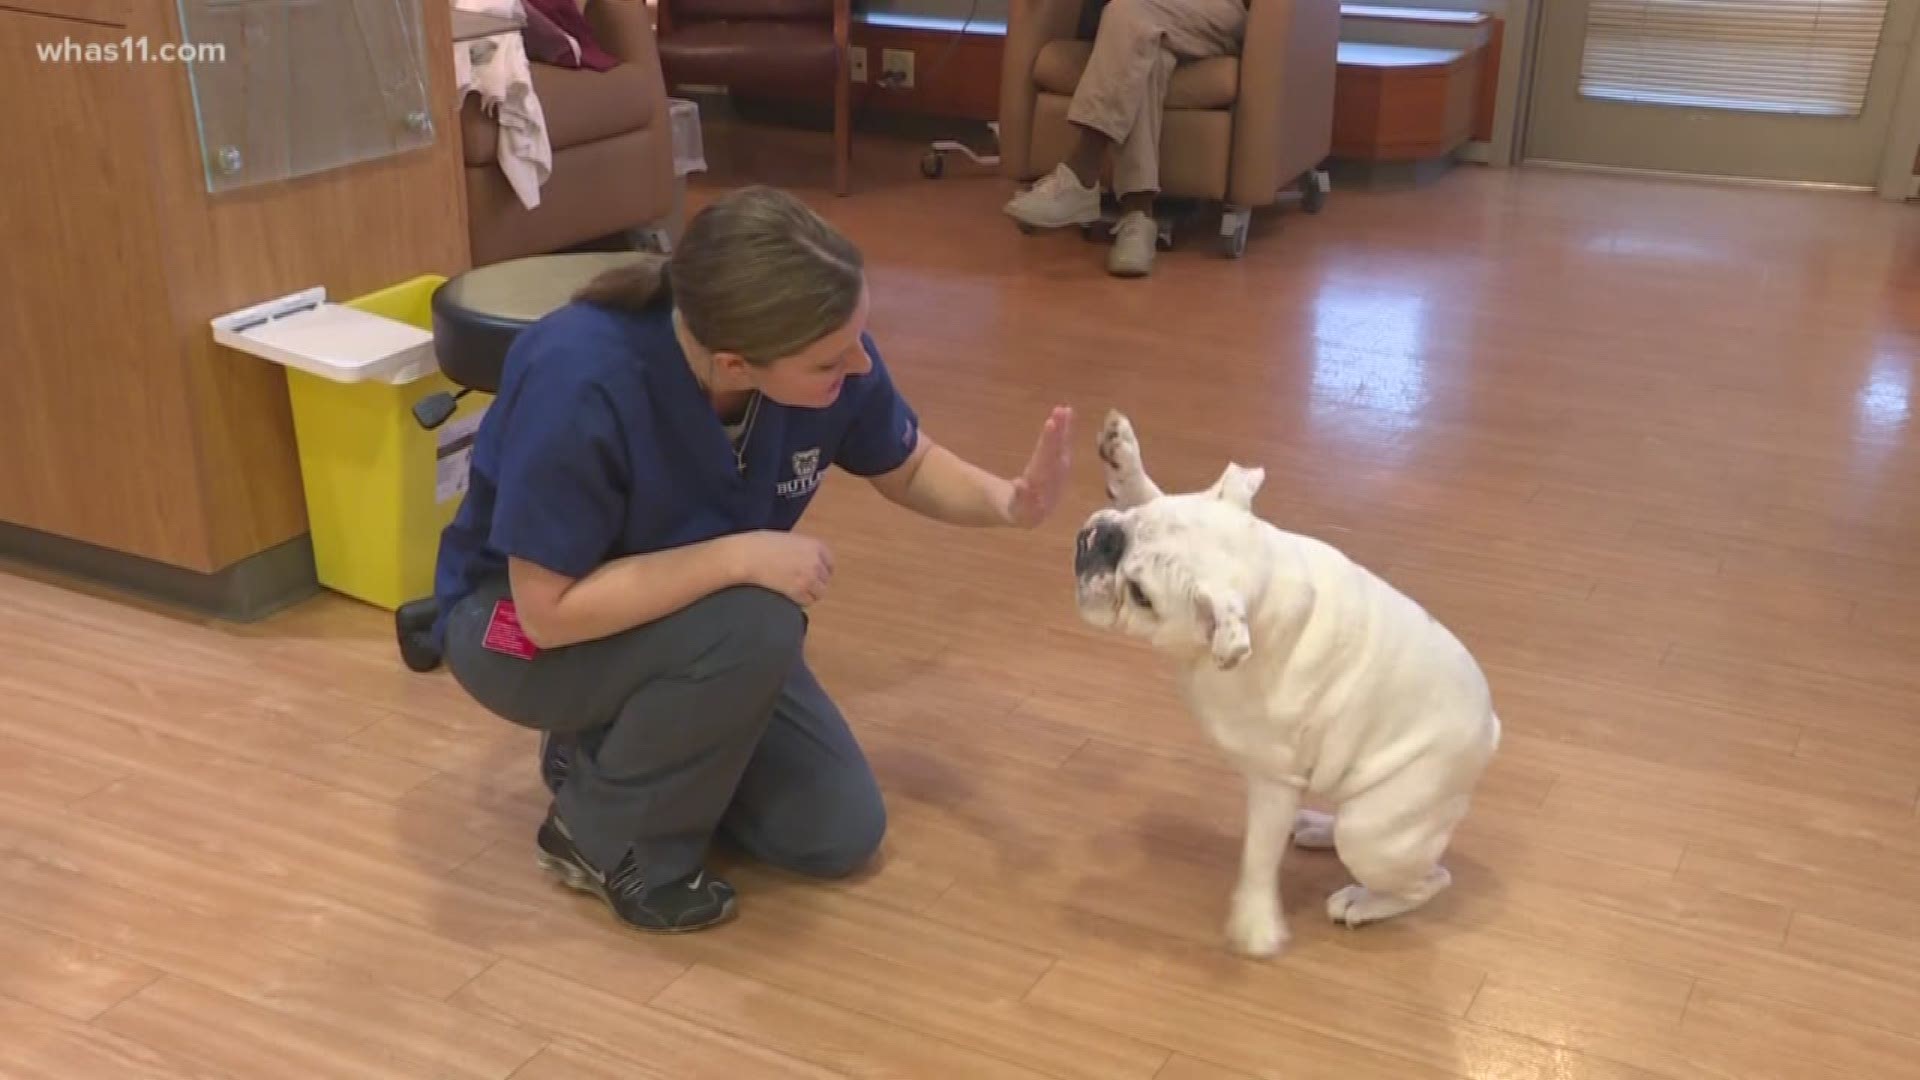 Tucker the bulldog loves going to work with his mom - as do the cancer patients that he gets to visit.